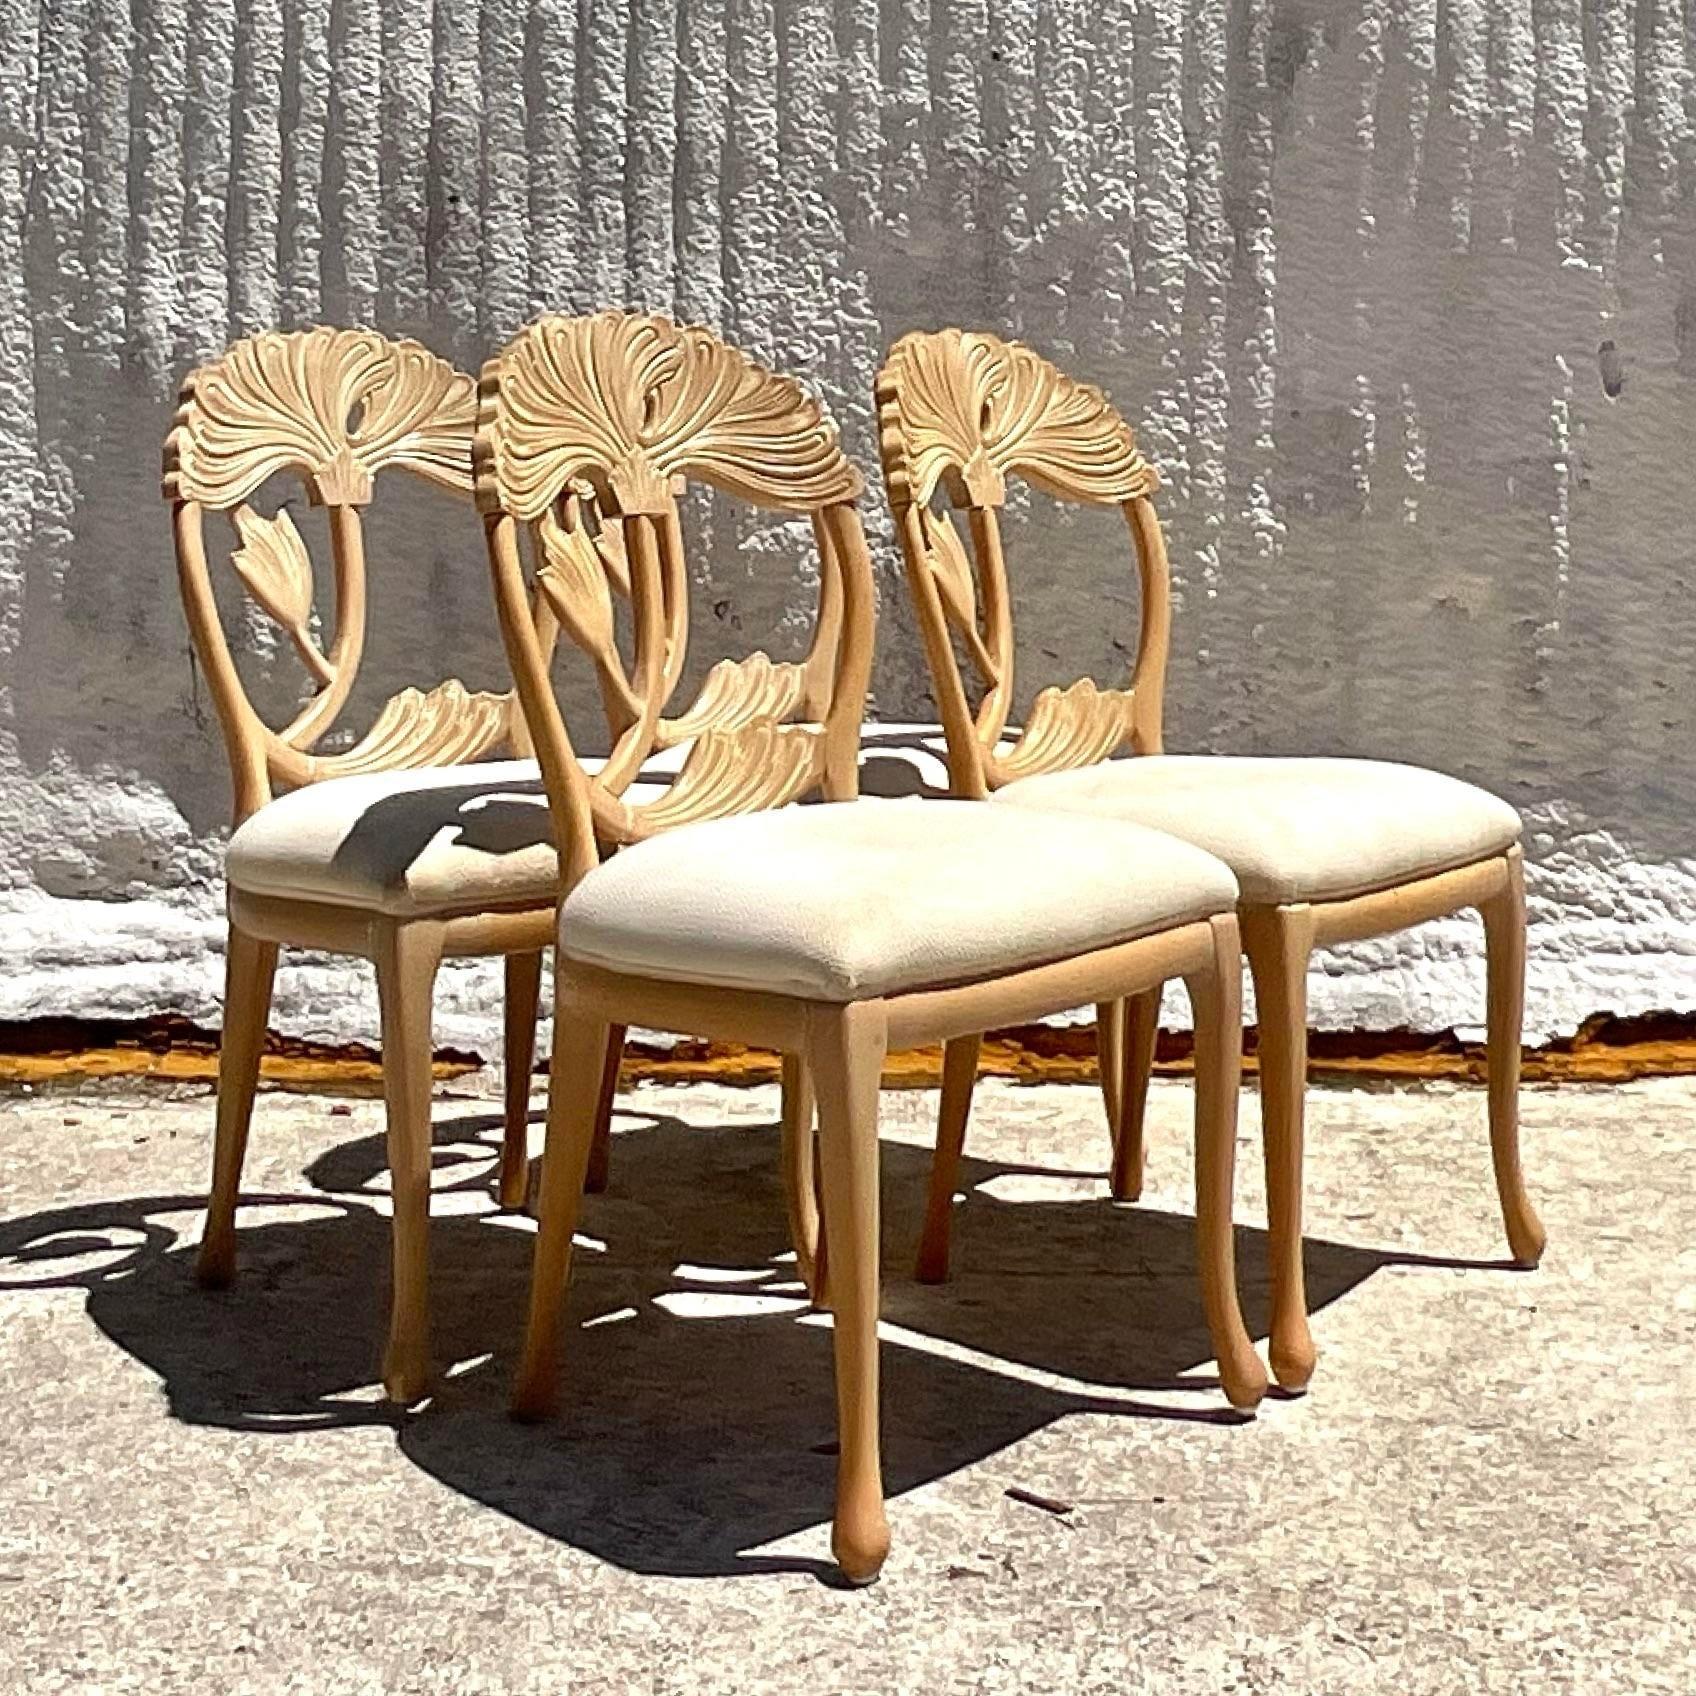 Vintage Boho Carved Lotus Blossom Dining Chairs - Set of 4 2